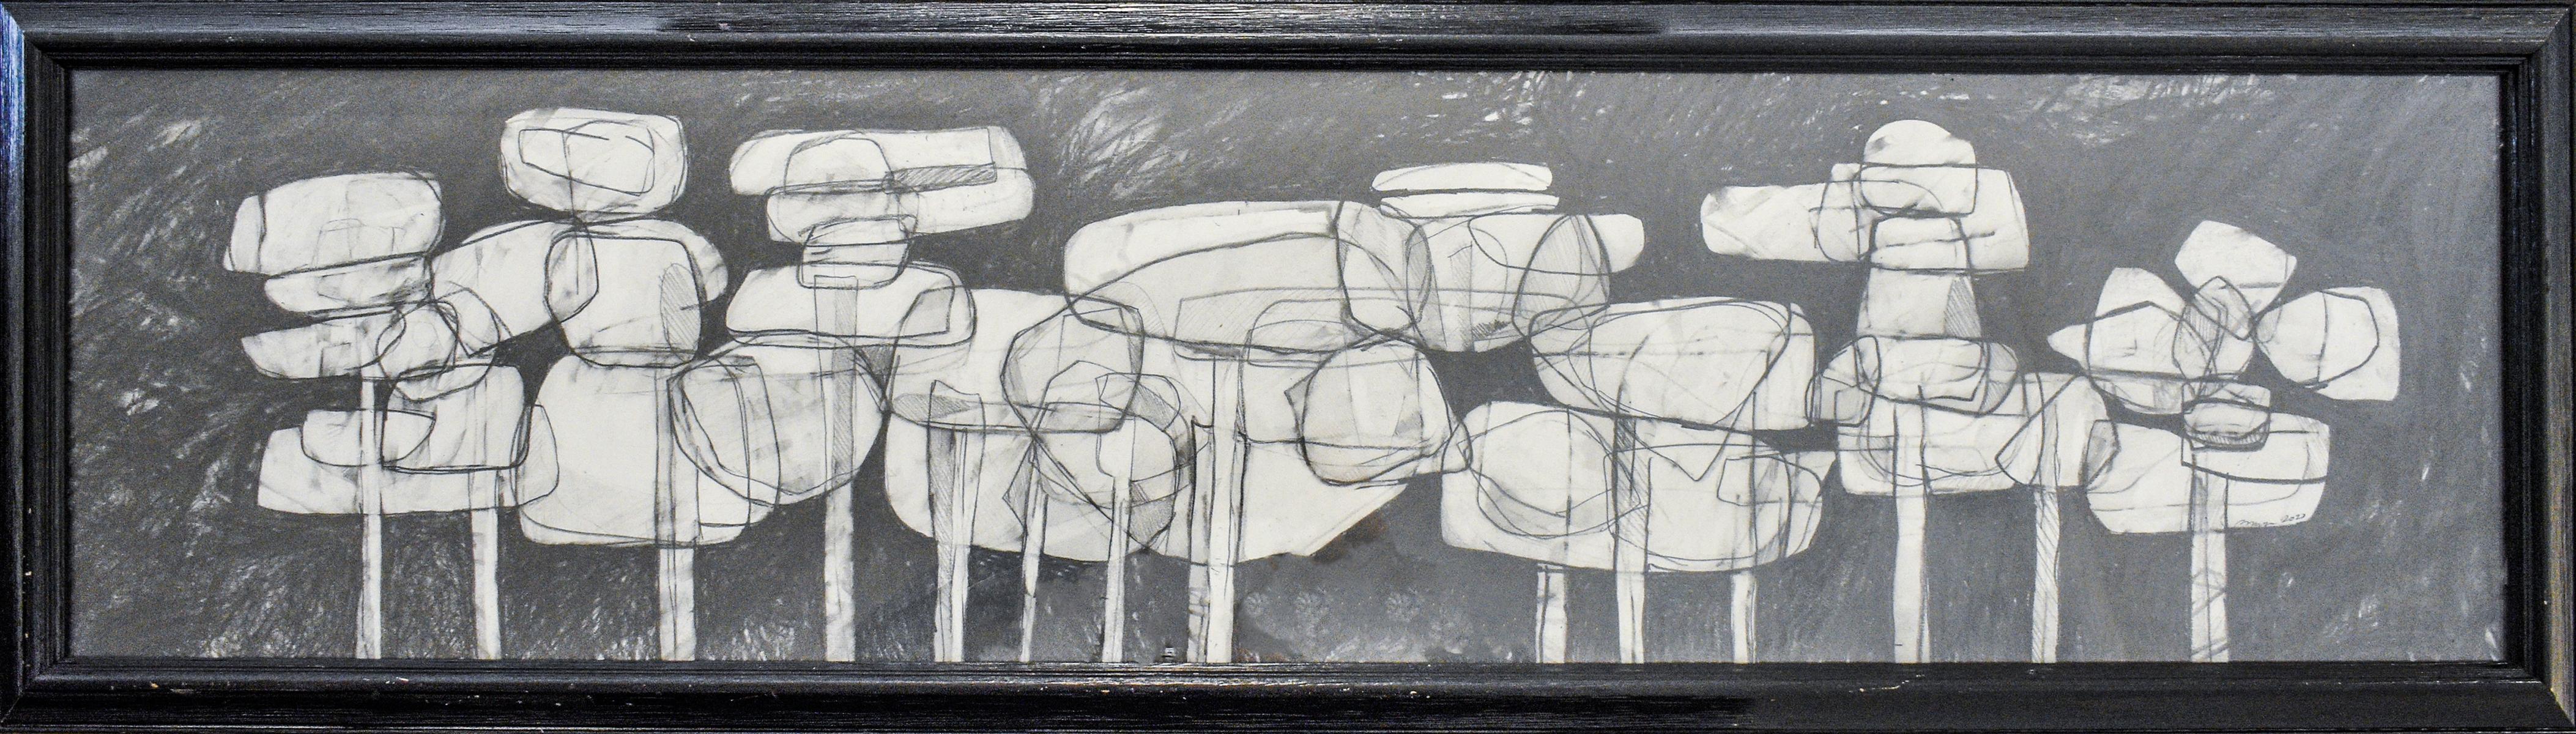 David Dew Bruner Abstract Drawing - Waterlilies 24 (Abstract Figurative Graphite Drawing in Antique Black Frame)